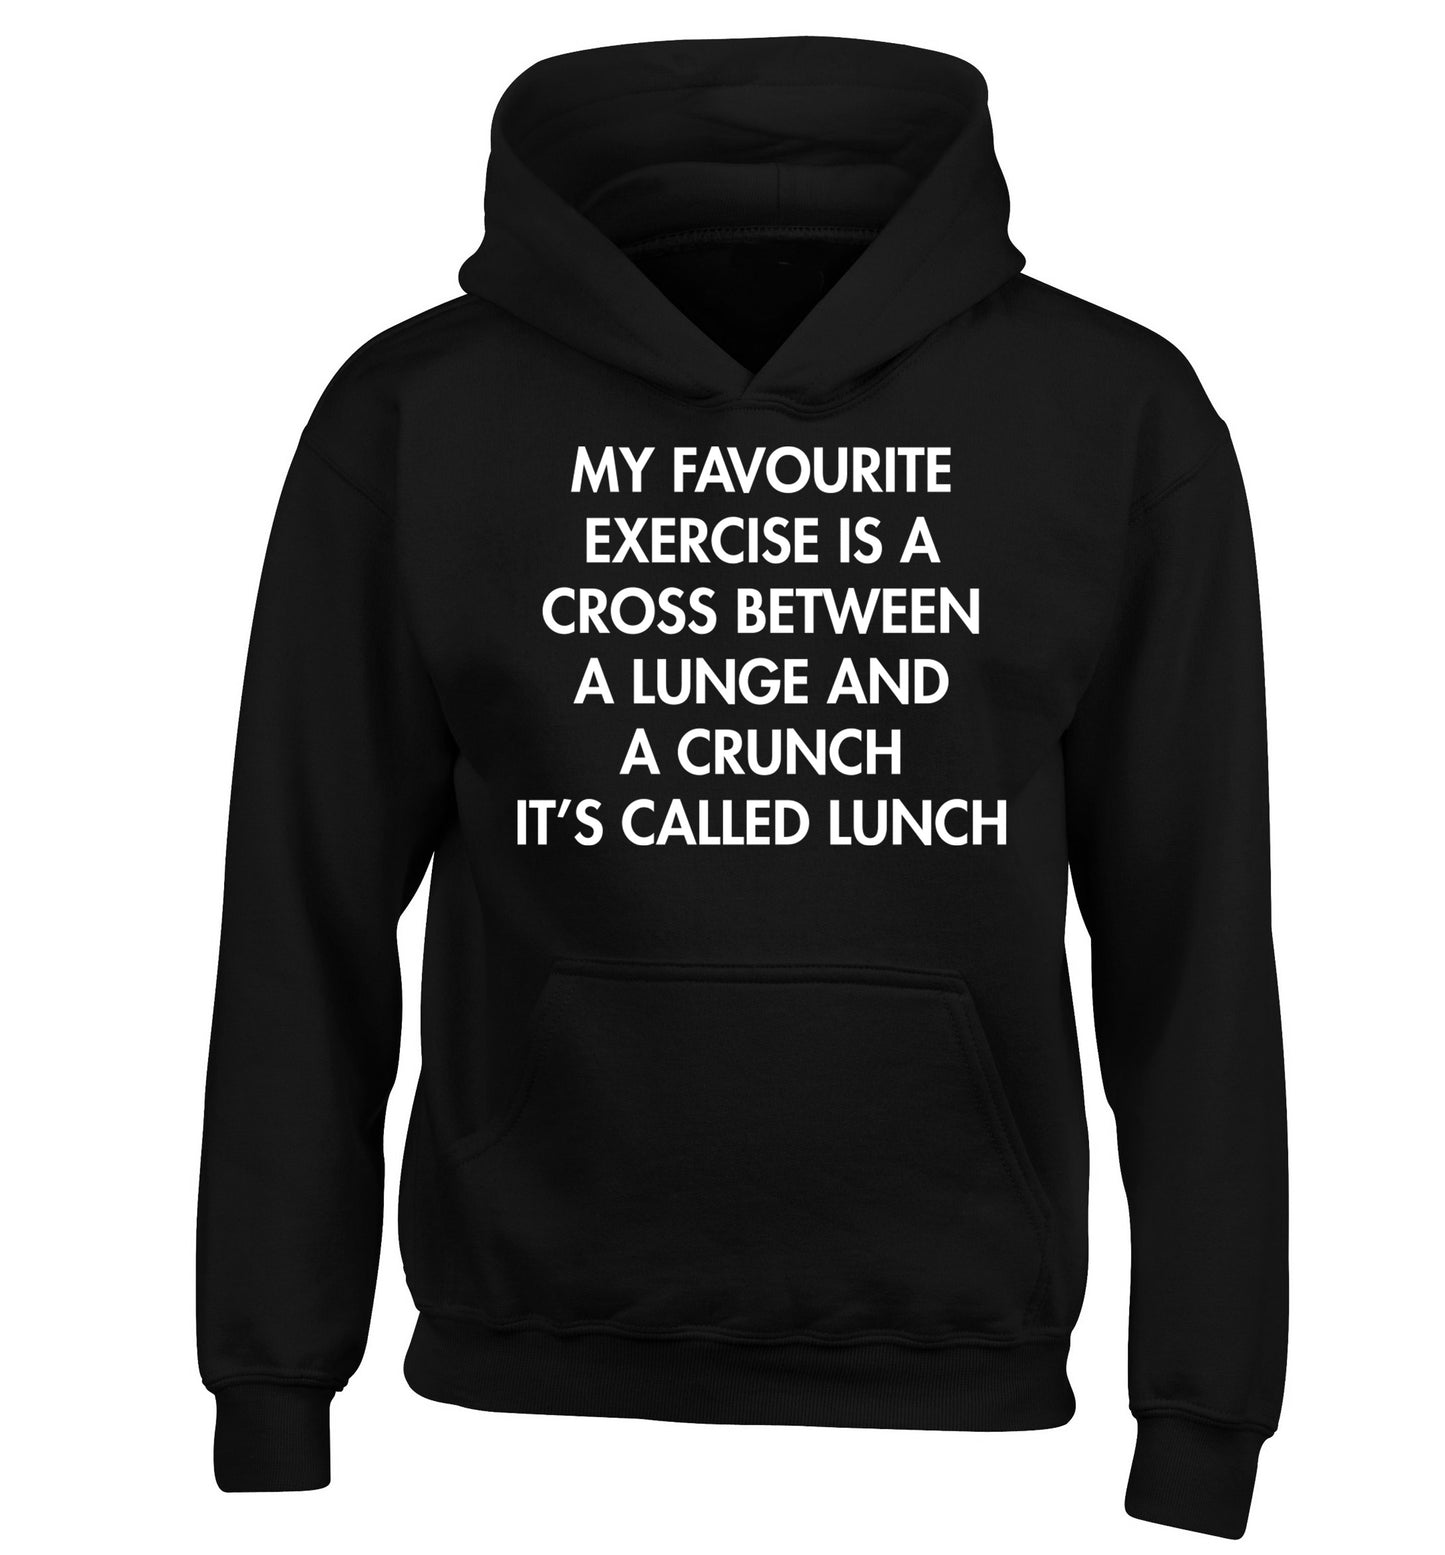 My favourite exercise is a cross between a lung and a crunch it's called lunch children's black hoodie 12-14 Years